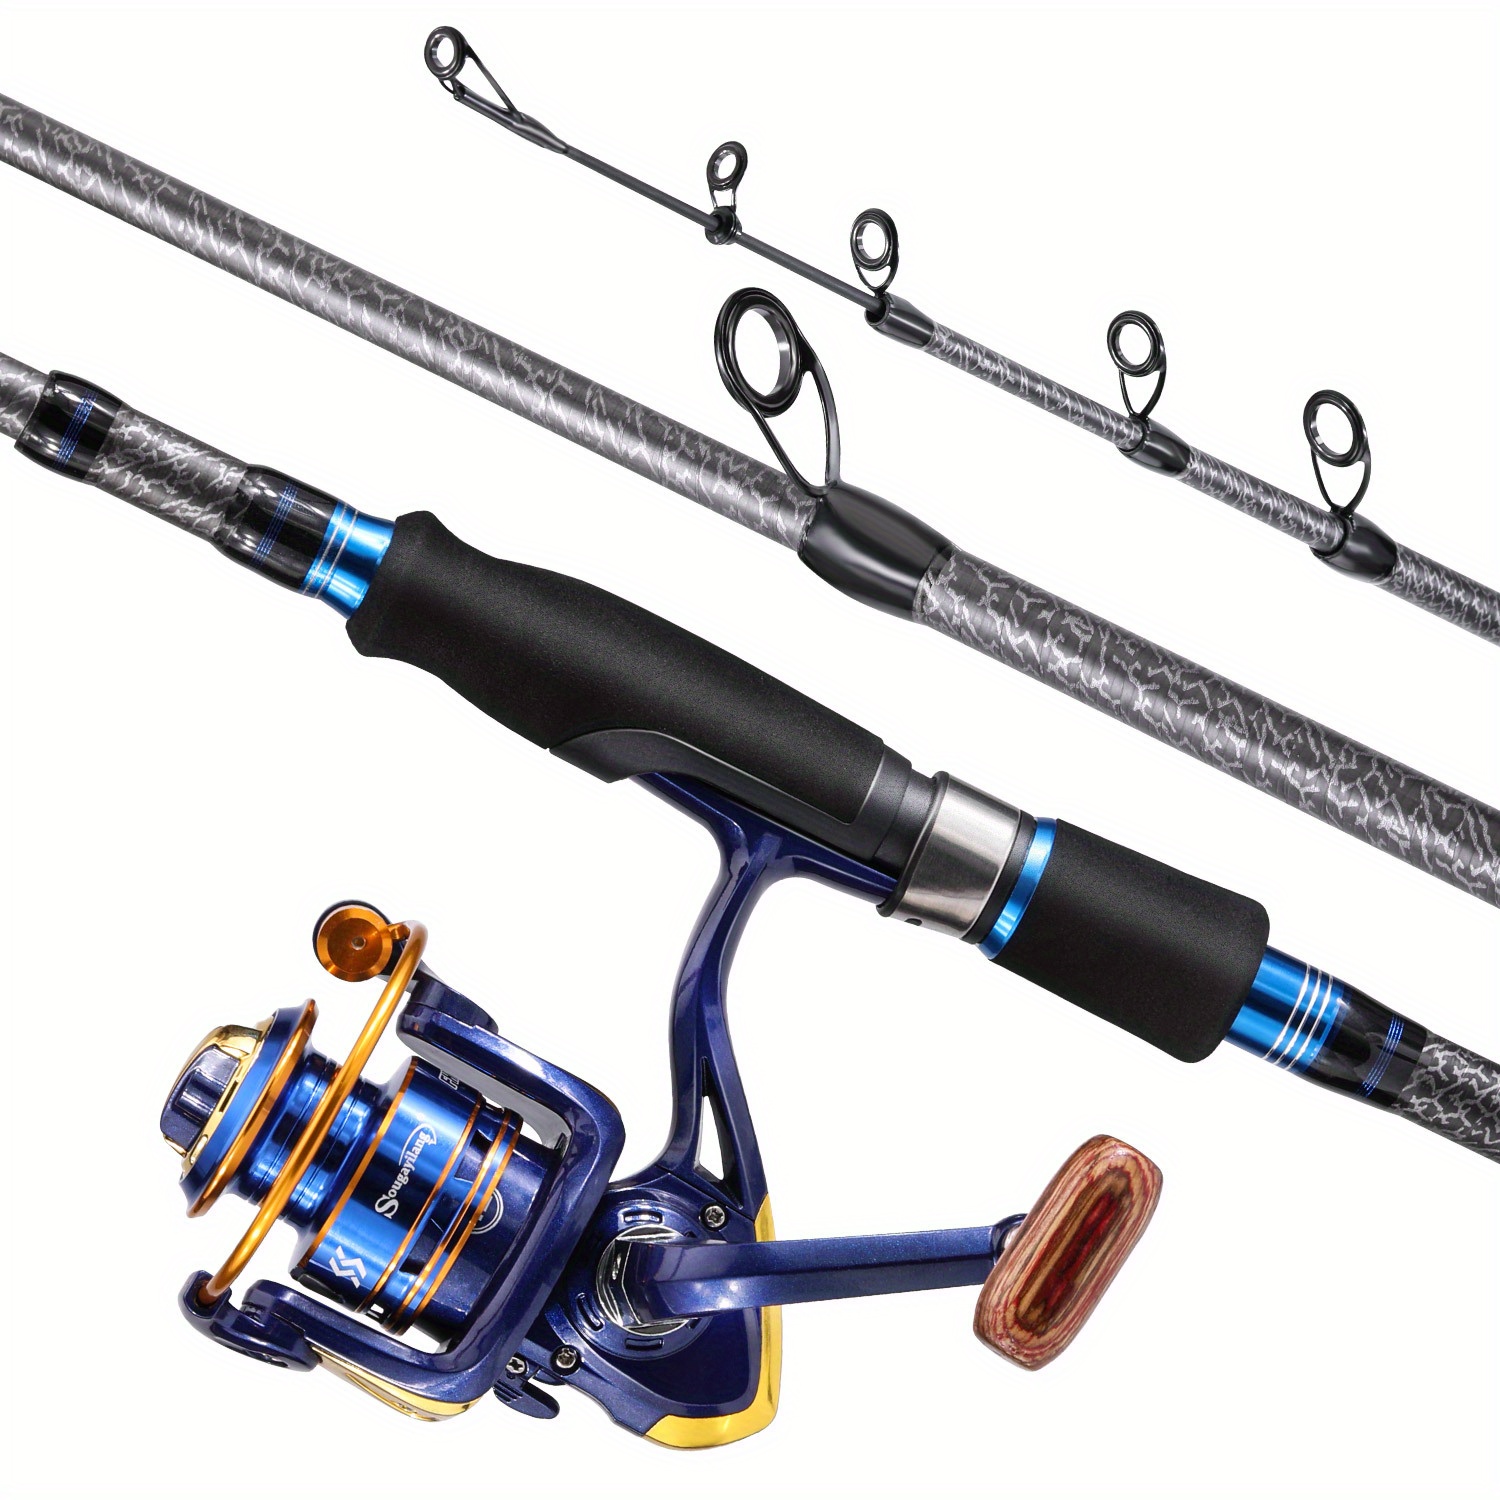 Fishing Rod and Reel Set Spinning Combo Fishing Tackle Set with Portable Travel  Rod and Reel Fishing Gear for Freshwater Saltwater Fishing